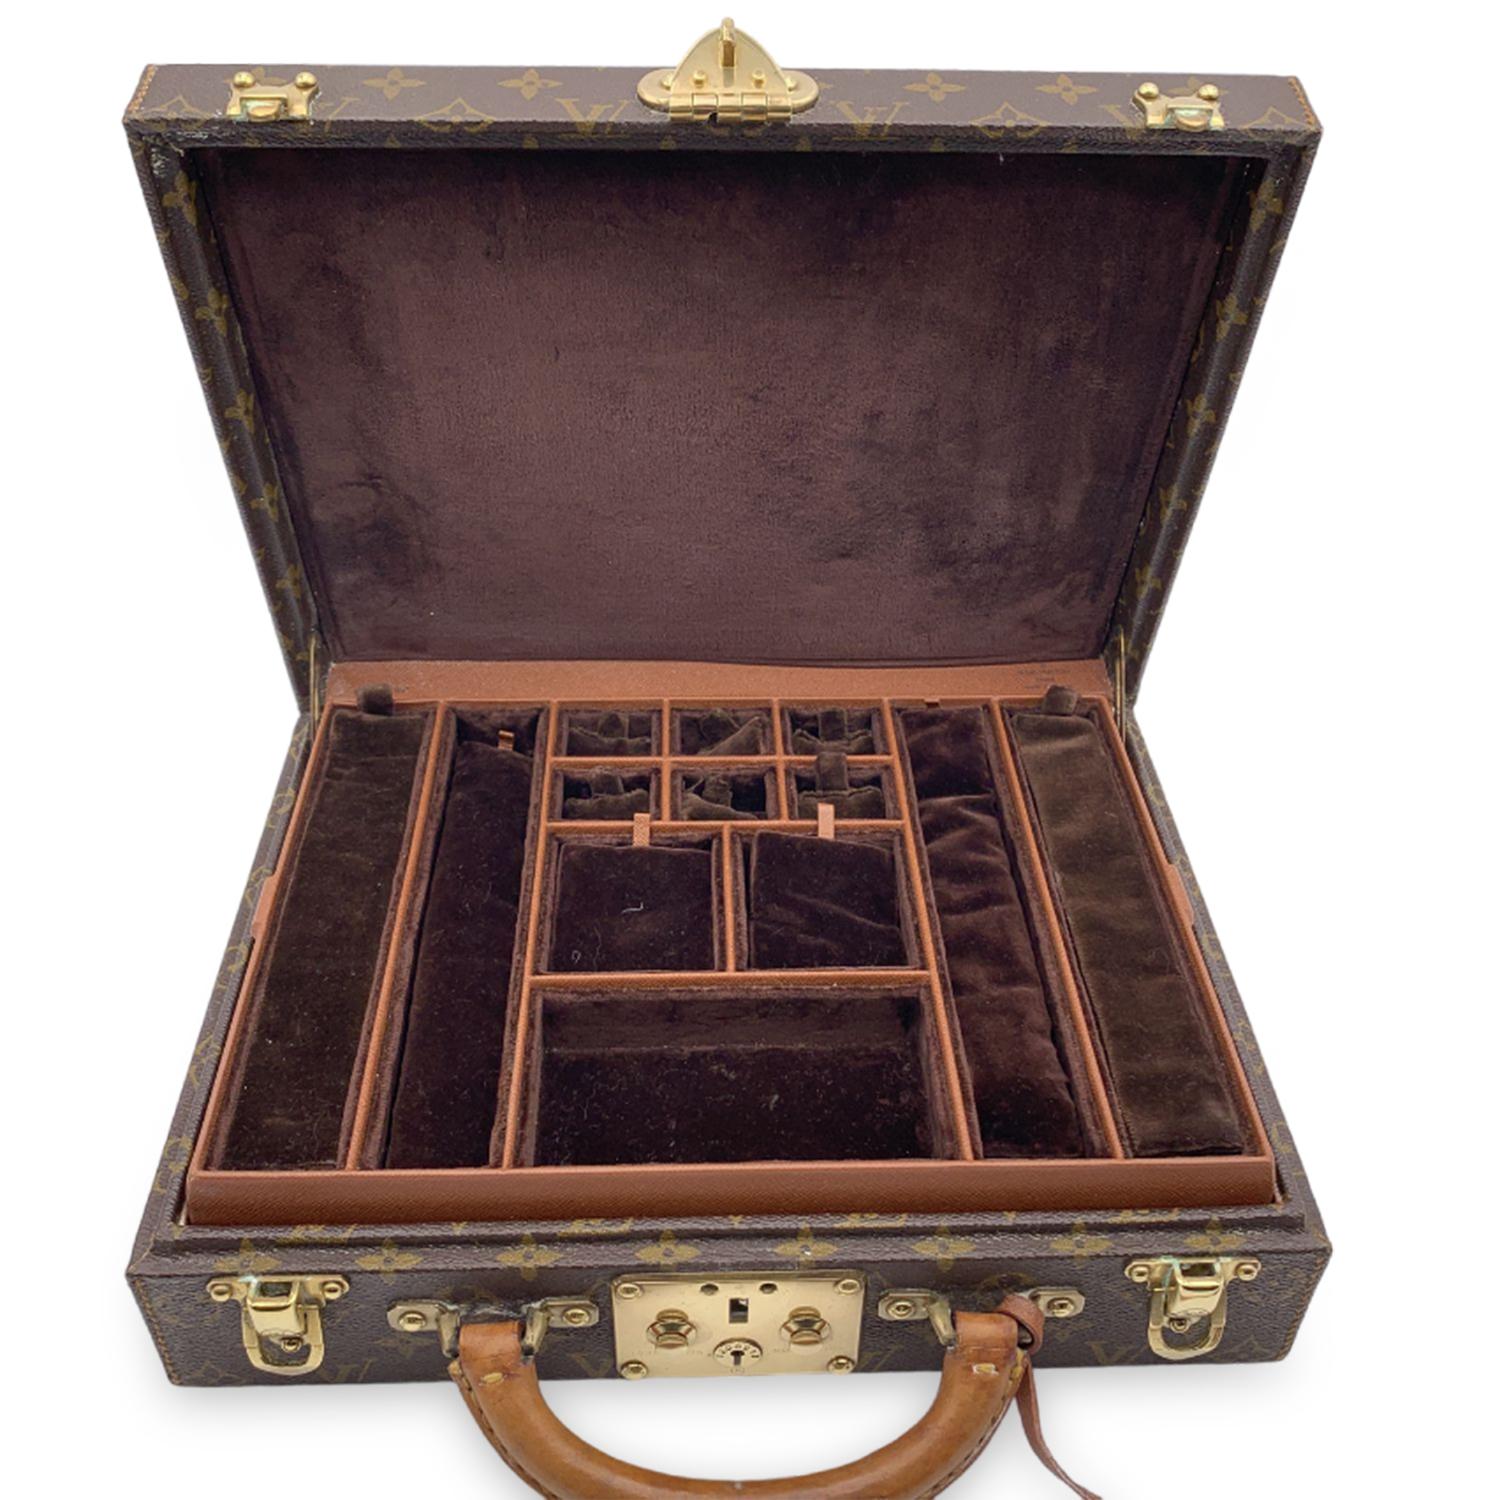 Splendid Louis Vuitton monogram 'Boite Bijoux' jewelry travel trunk/case . Made with timeless monogram canvas with leather handle and golden brass pieces. It features 2 storage spaces divided by a removable tray with13 different-sized compartments.